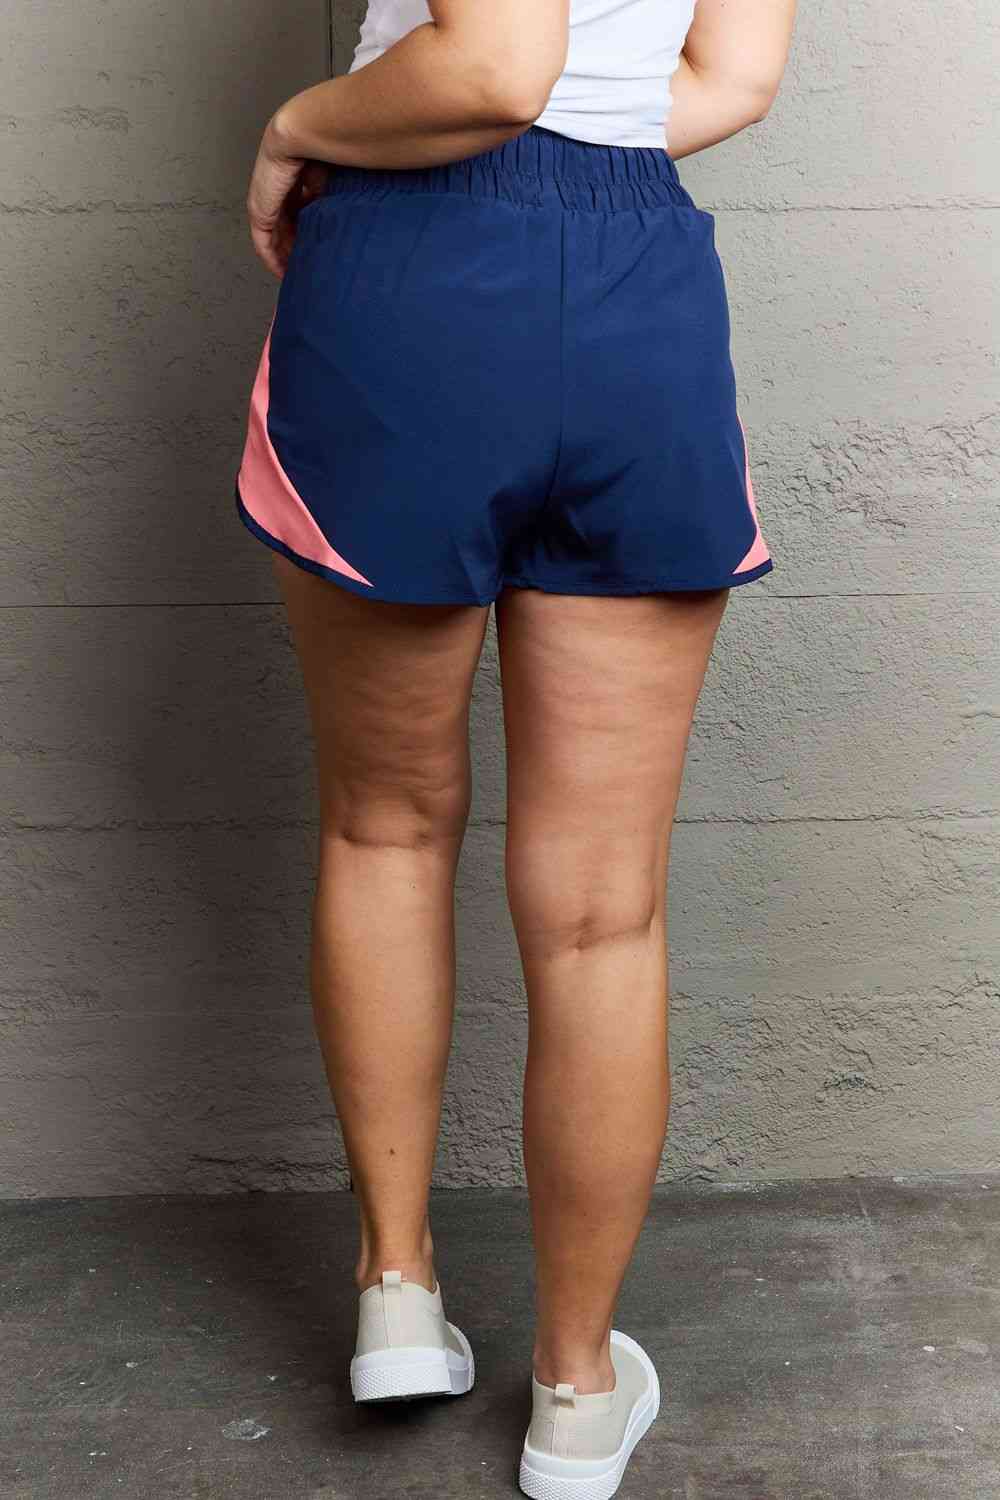 Women's Running Shorts Two Tone Navy Blue and Coral Pink